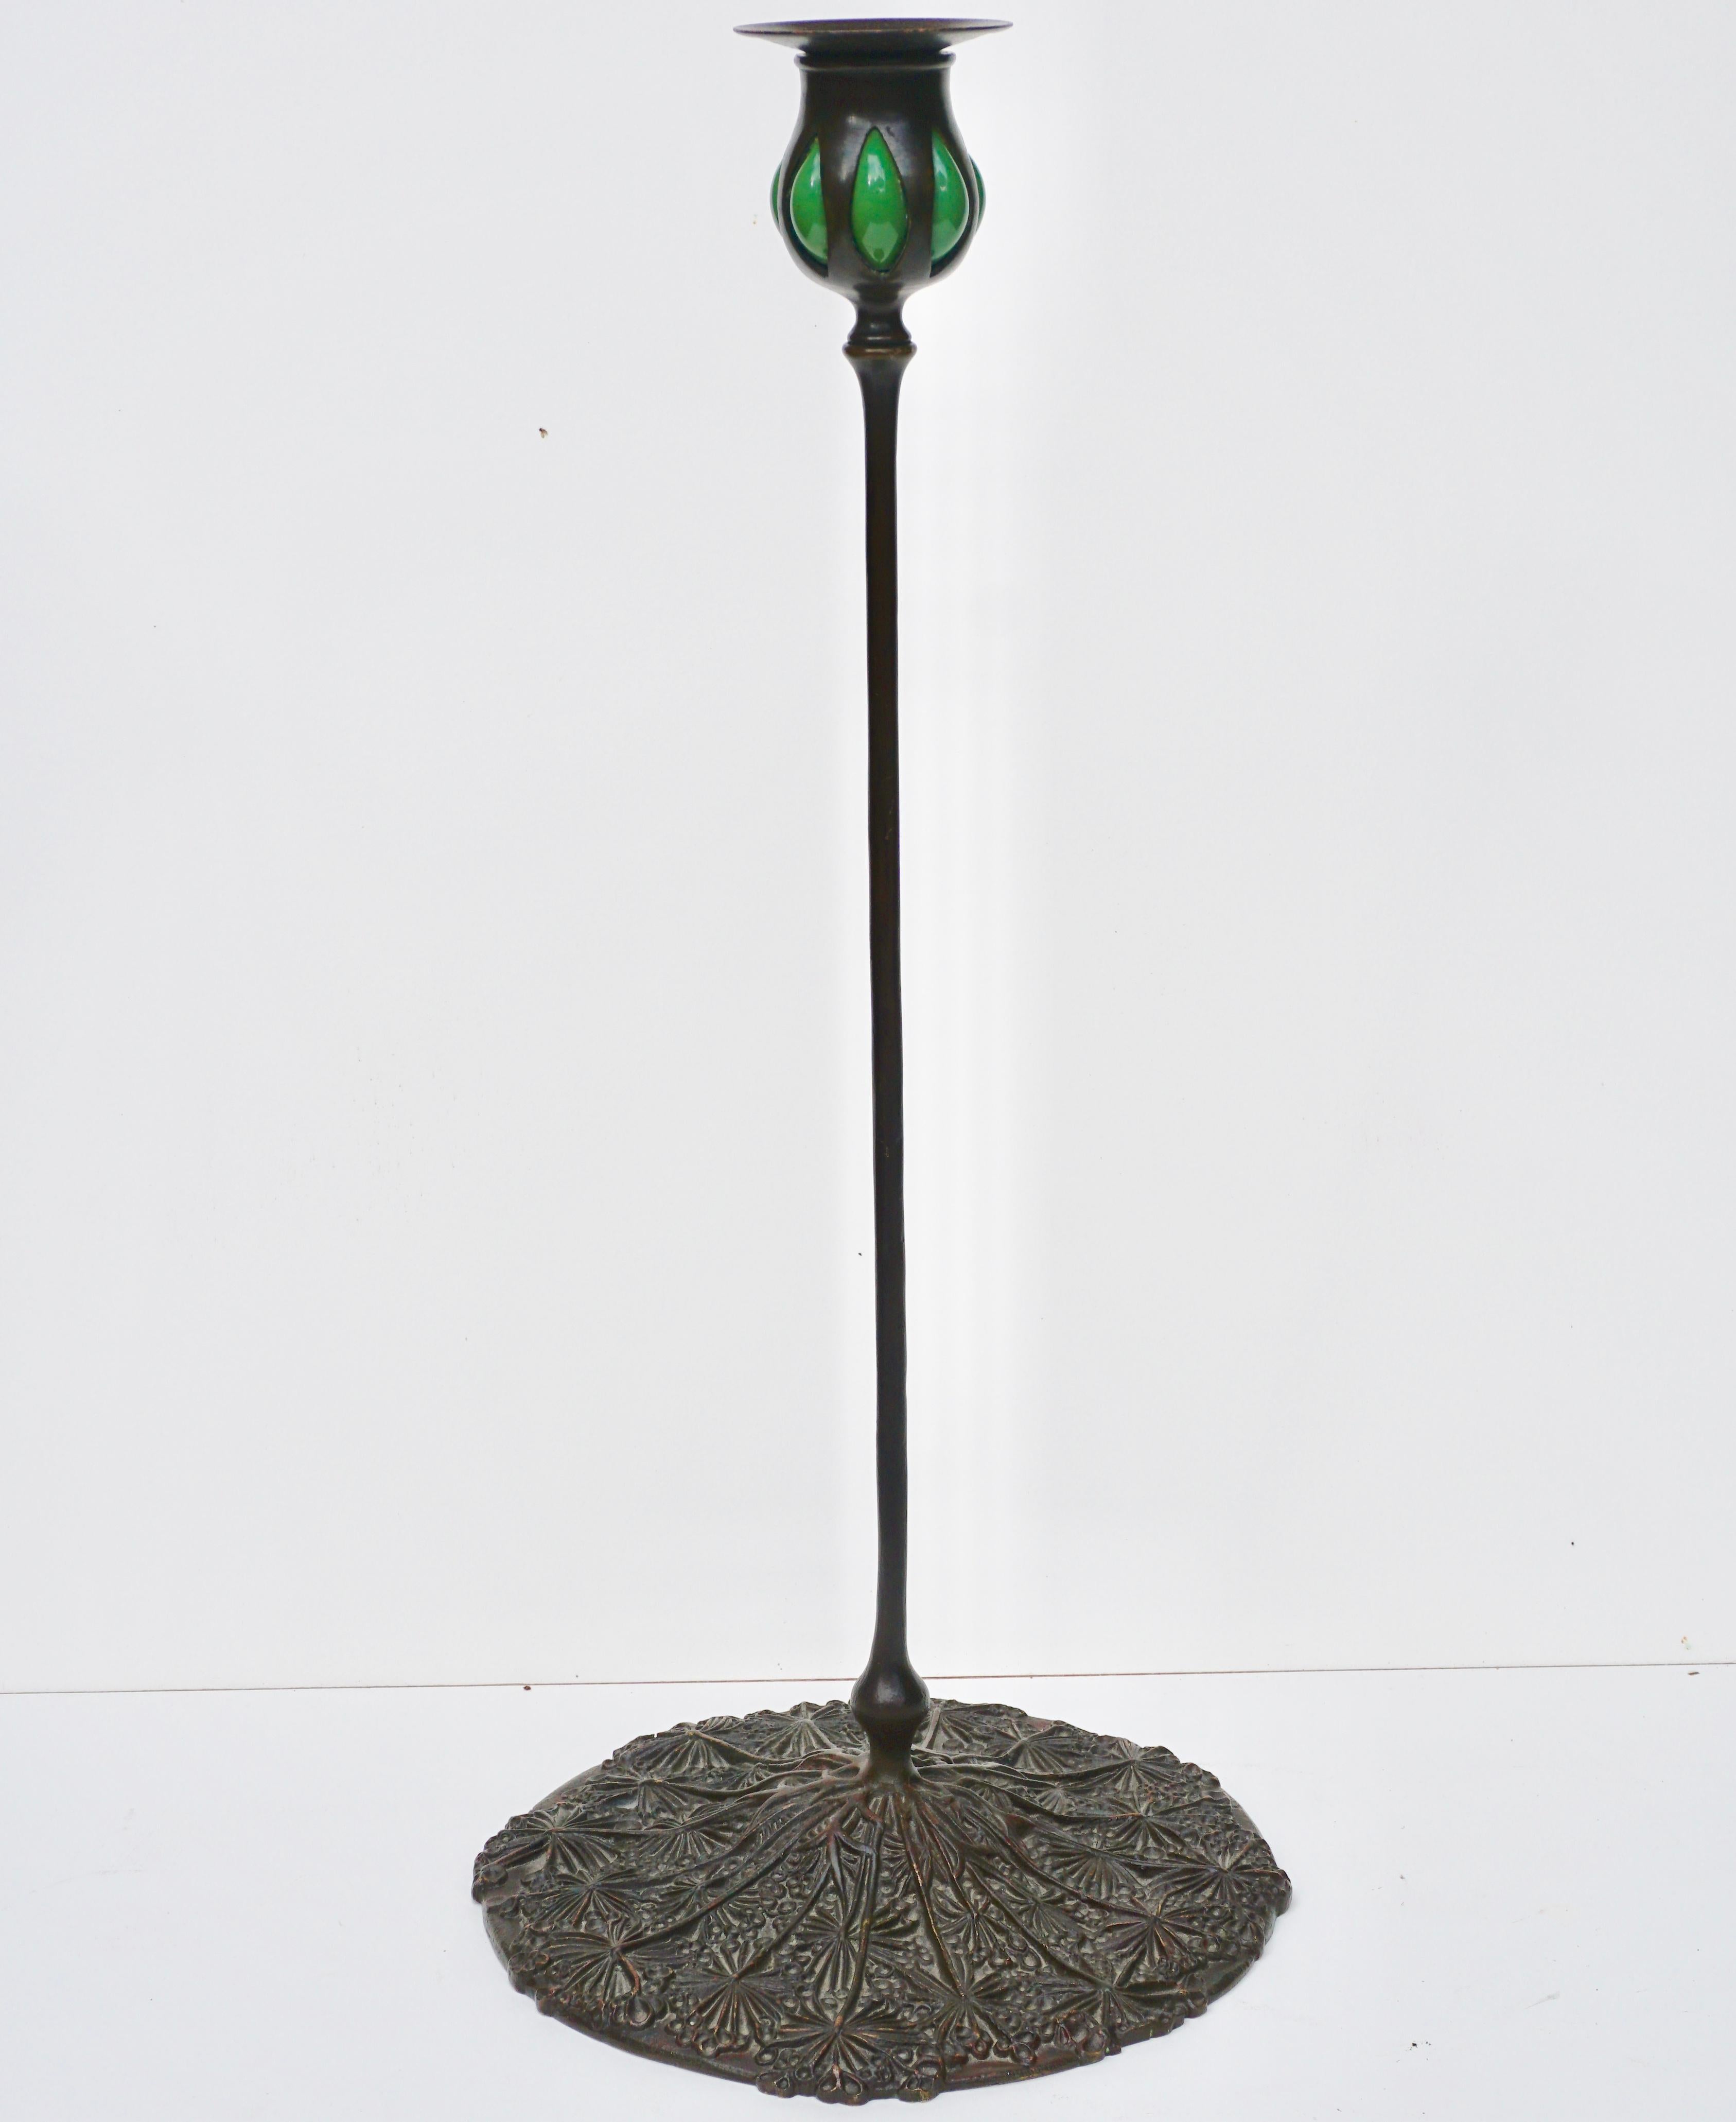 Tiffany Studios New York
Queen Anne's Lace blown-out candlestick, New York, circa 1900.
Patinated bronze, blown glass. A very decorative Art Nouveau - Art Deco candle stick lamp.

Stamped TGDCO. TIFFANY STUDIOS NEW YORK D555

Measures: Height